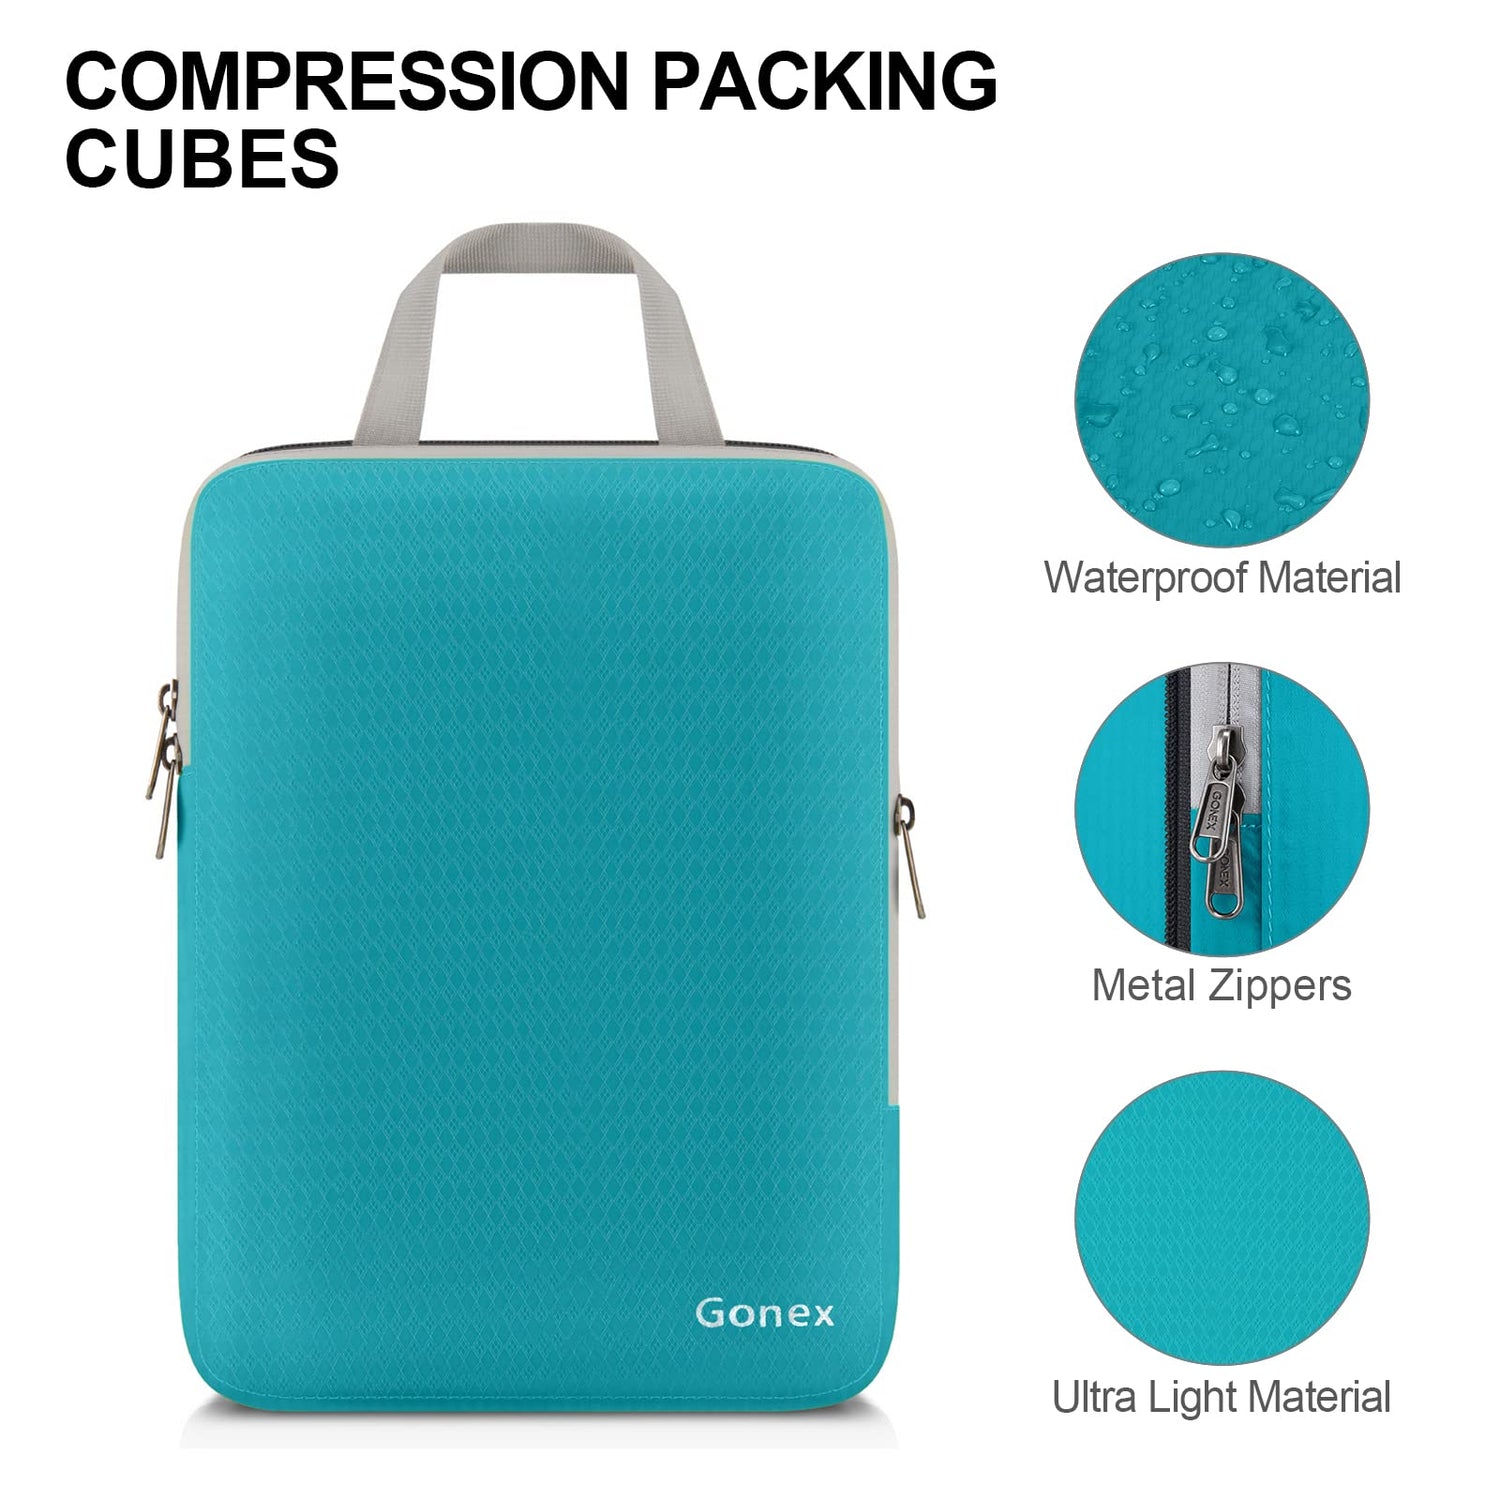 Gonex Compression Packing Cubes  Extensible Storage Mesh Organizers